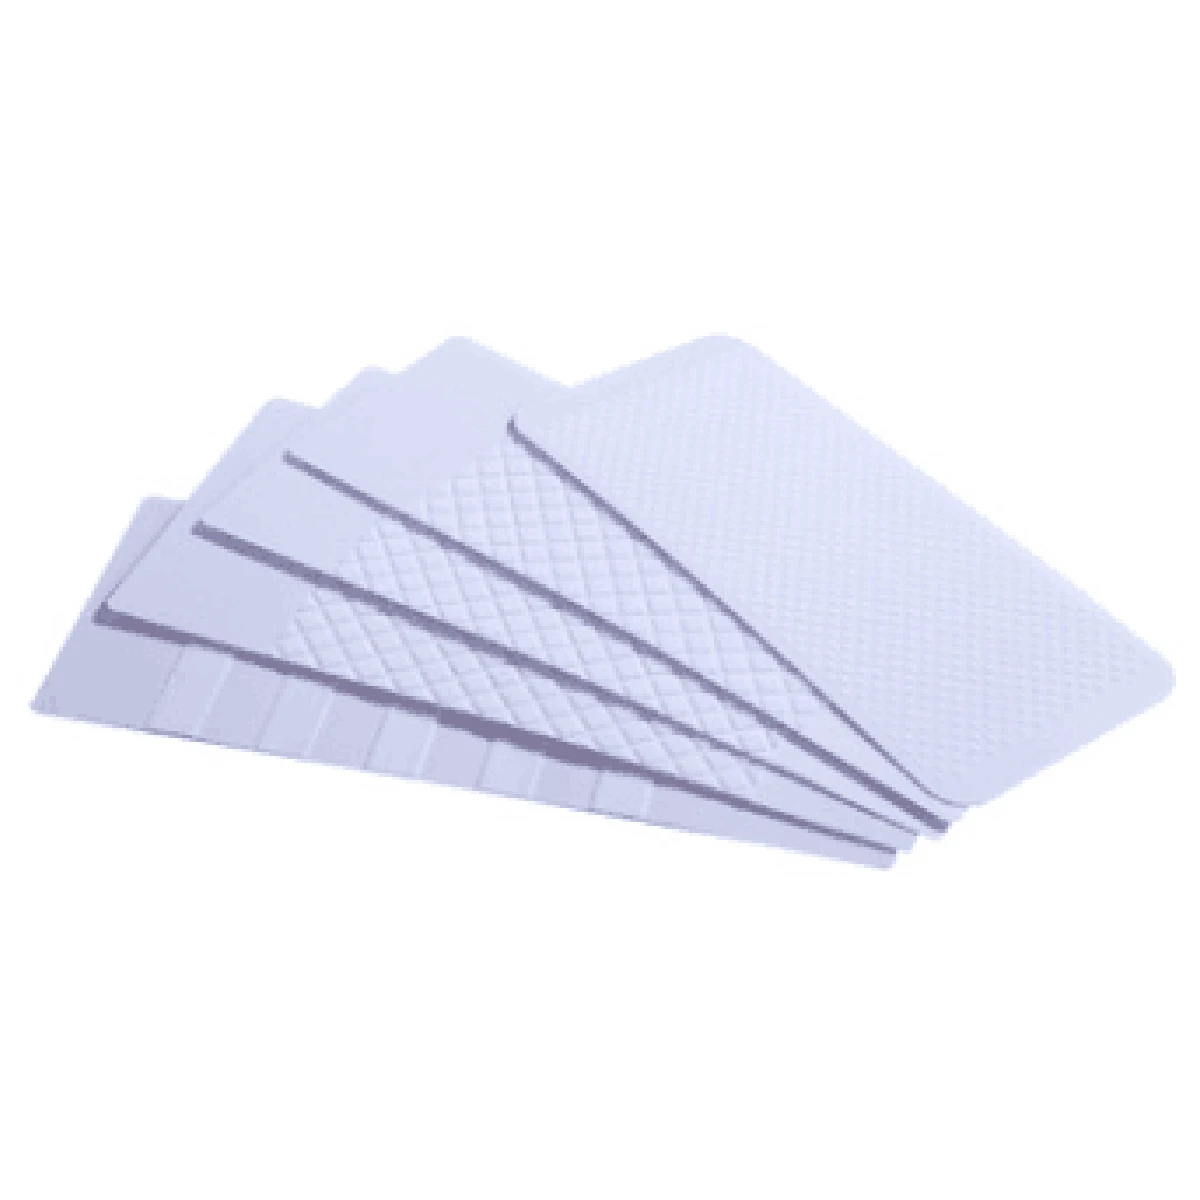 10pcs a pack  machine ATM financial equipment cleaning card 85x185mm